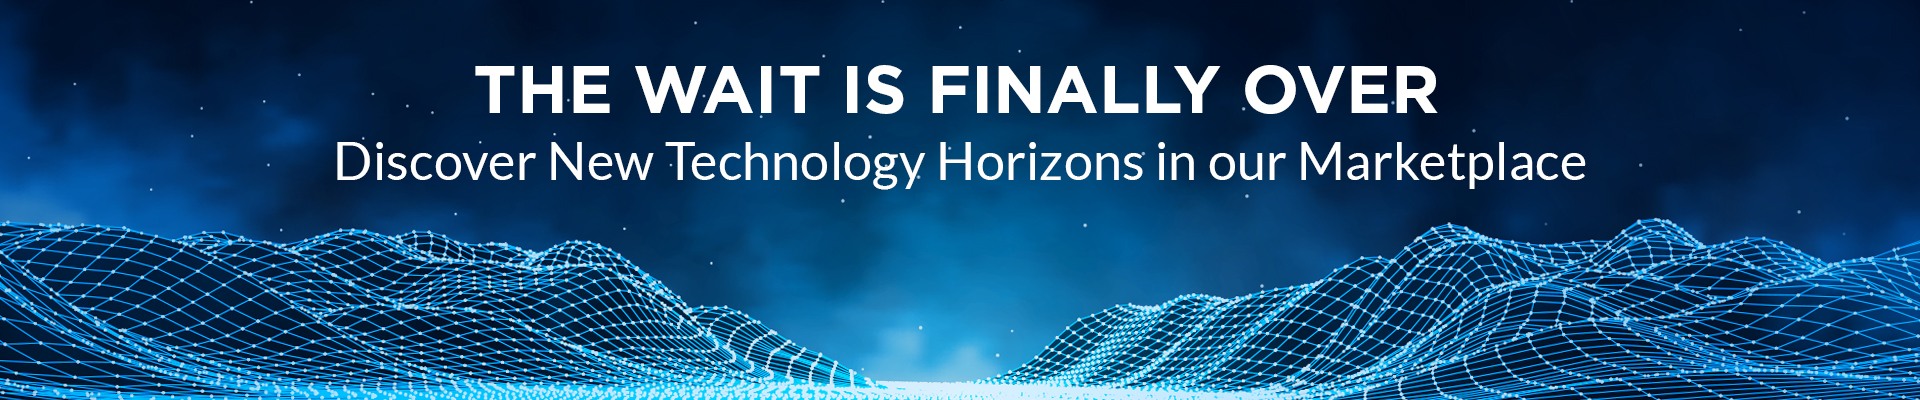 The Wait is Finally Over: Discover New Technology Horizons In Our Marketplace